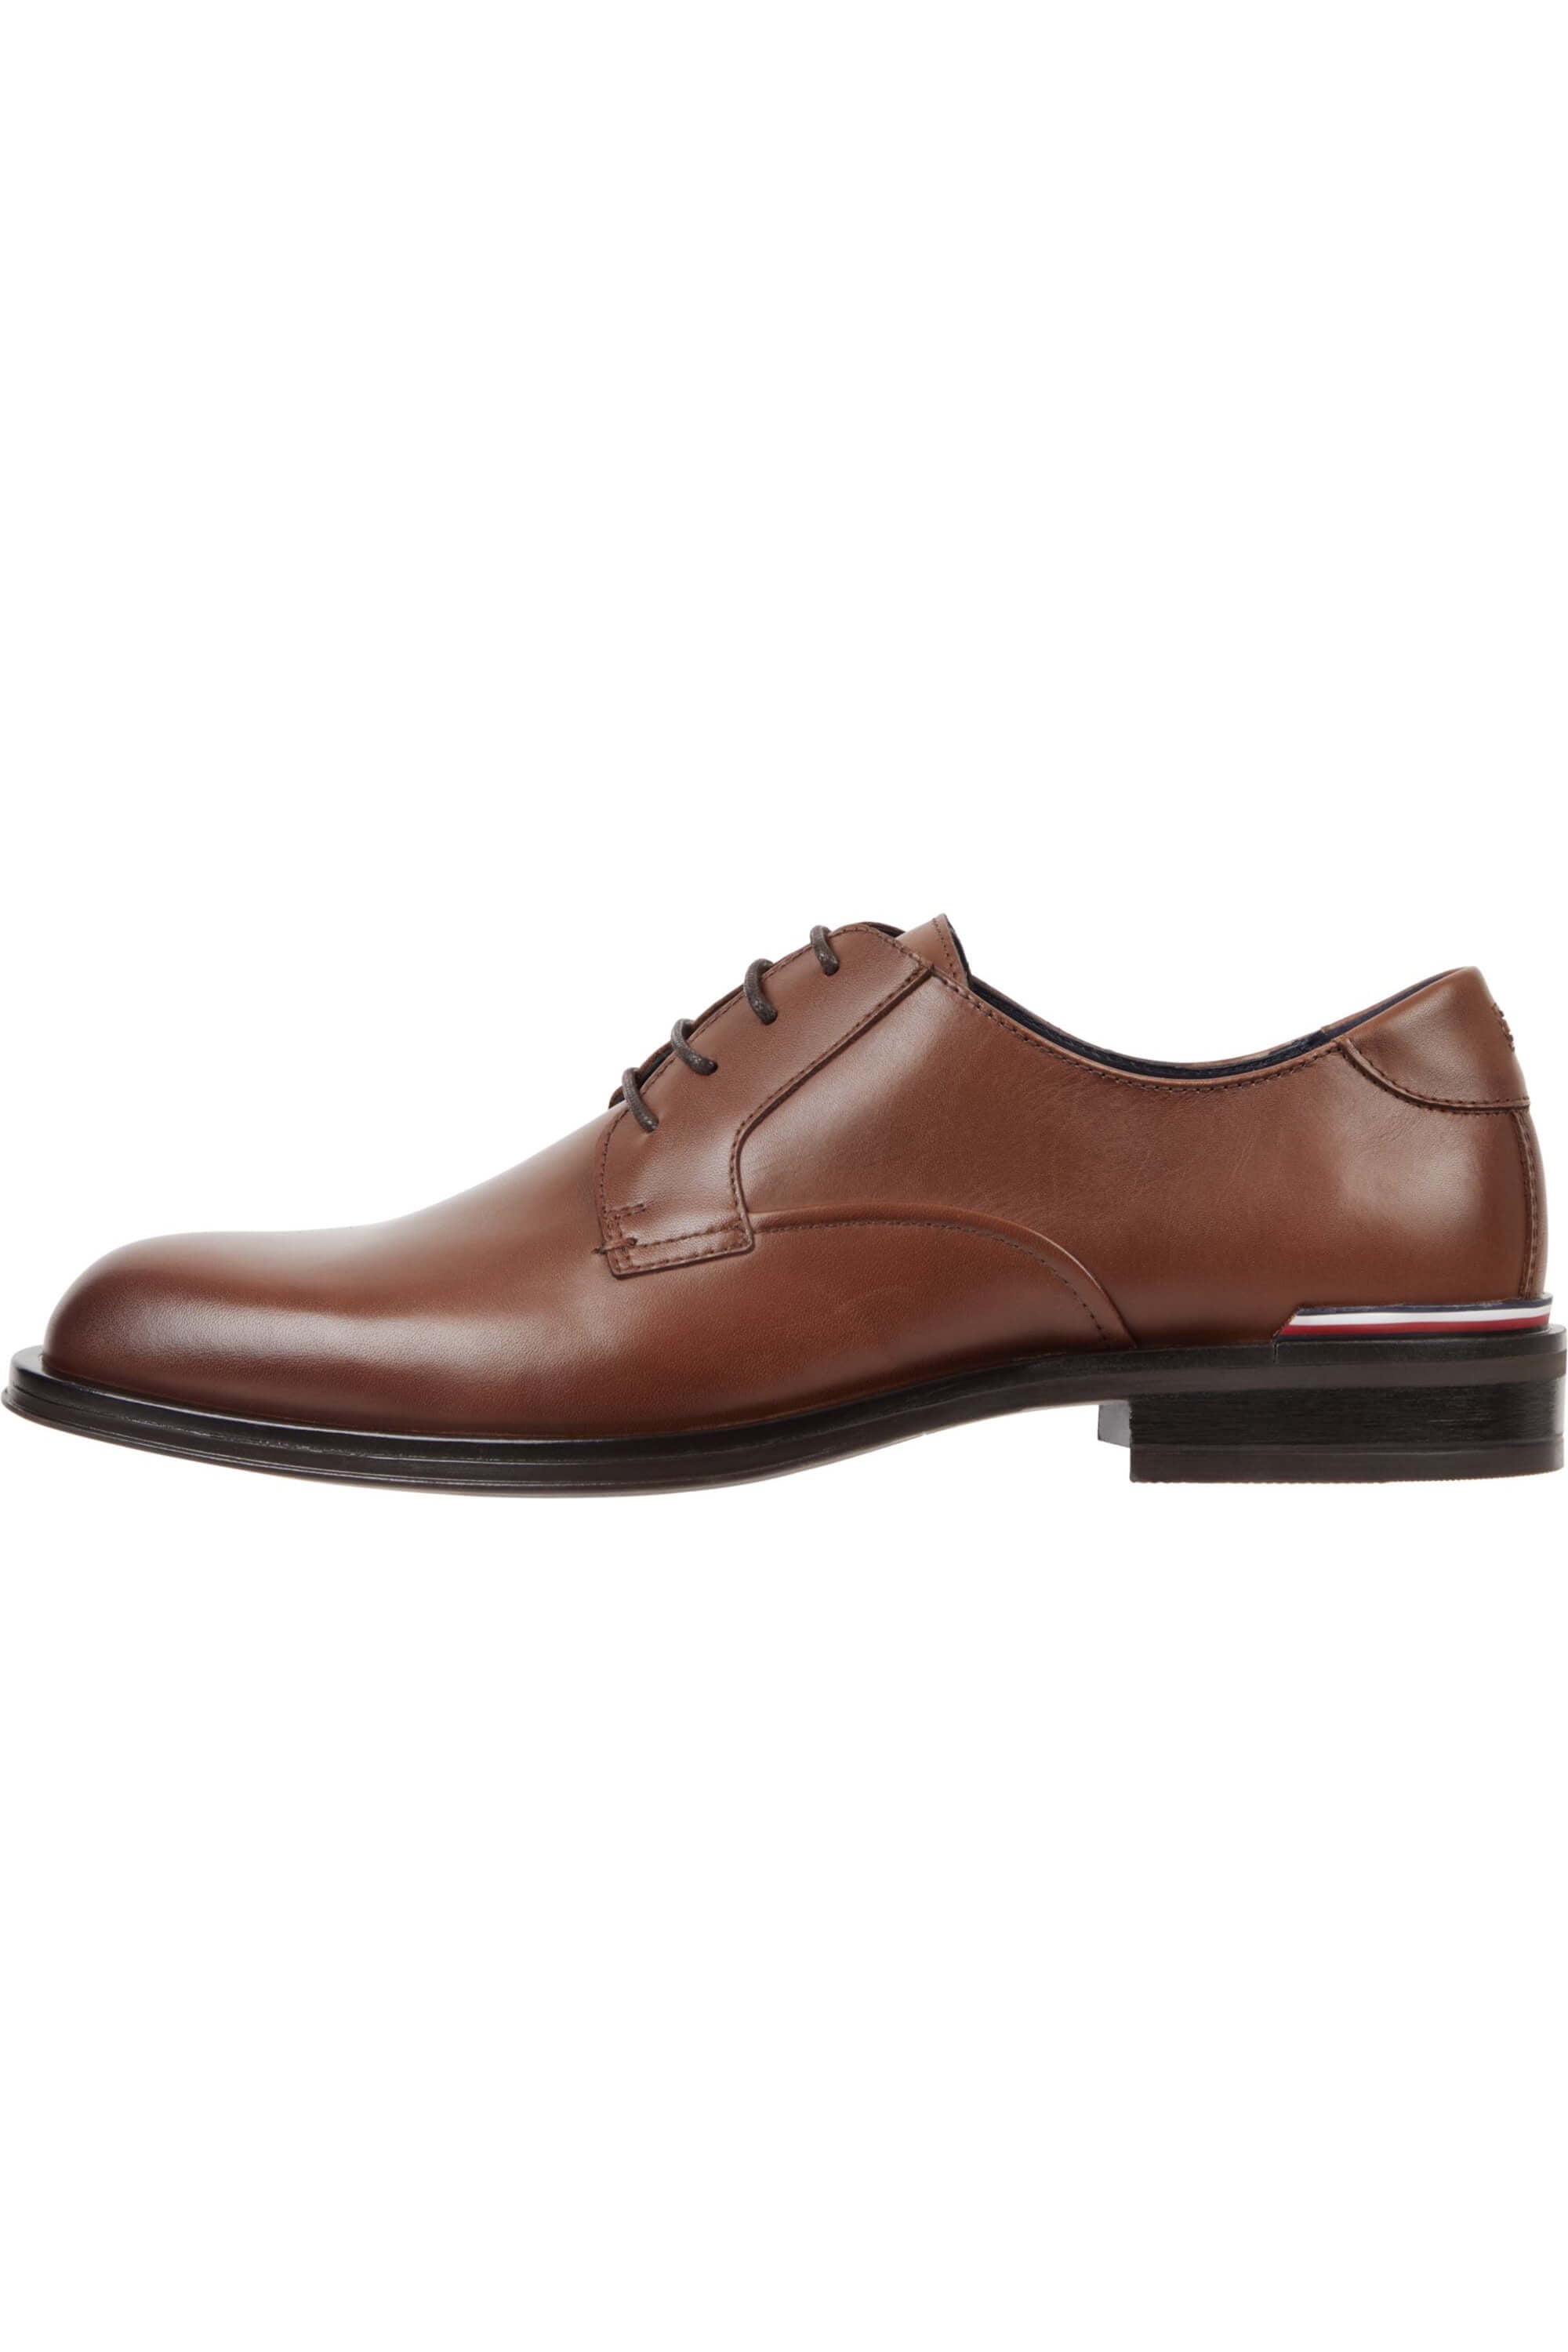 Buy Tommy Hilfiger Formal Shoes online in India